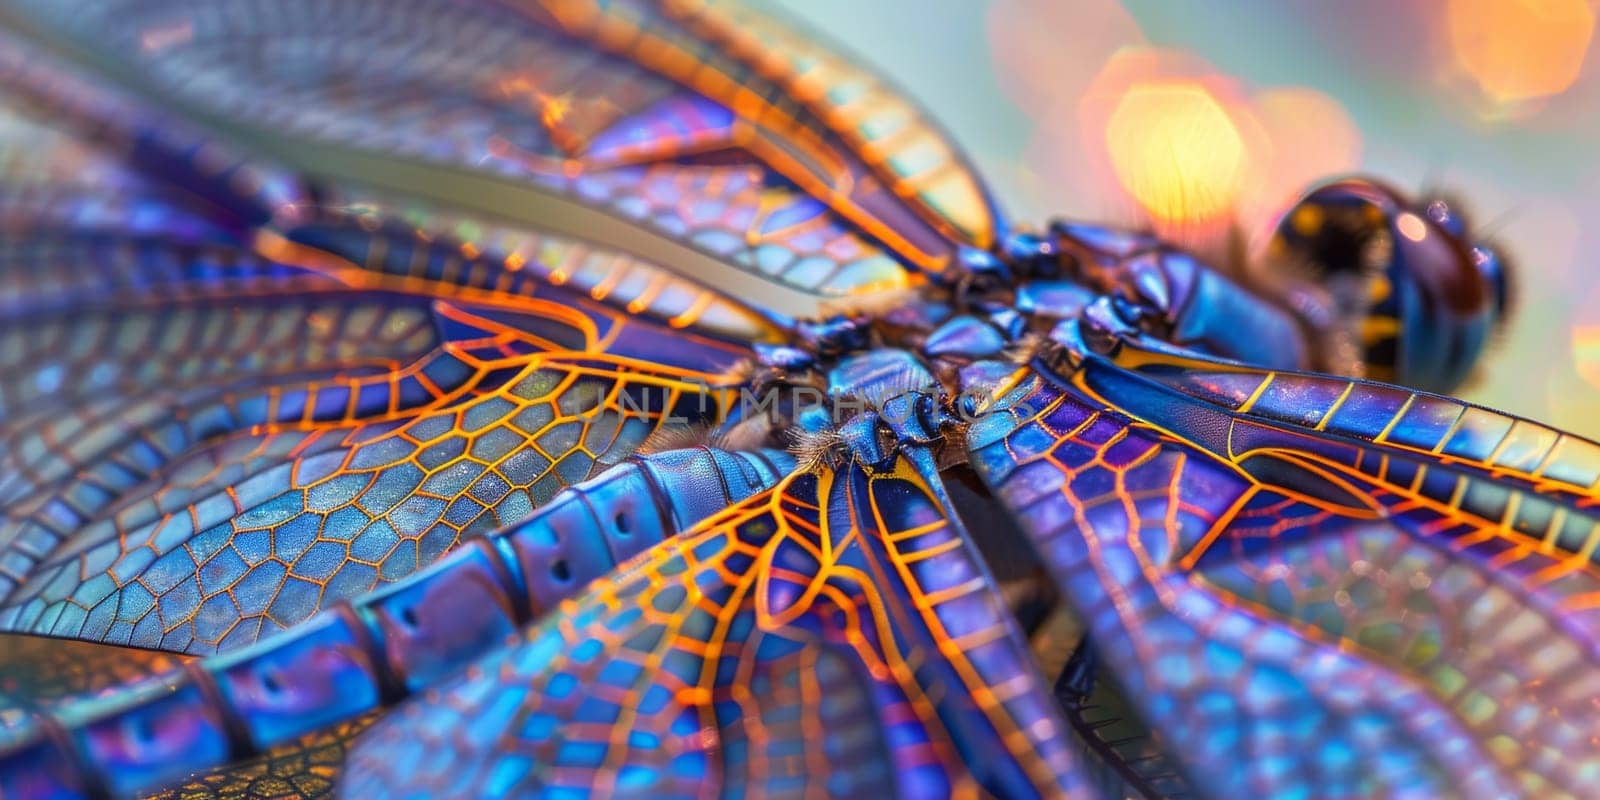 Capture the mesmerizing pattern of iridescent scales on dragonfly's wing